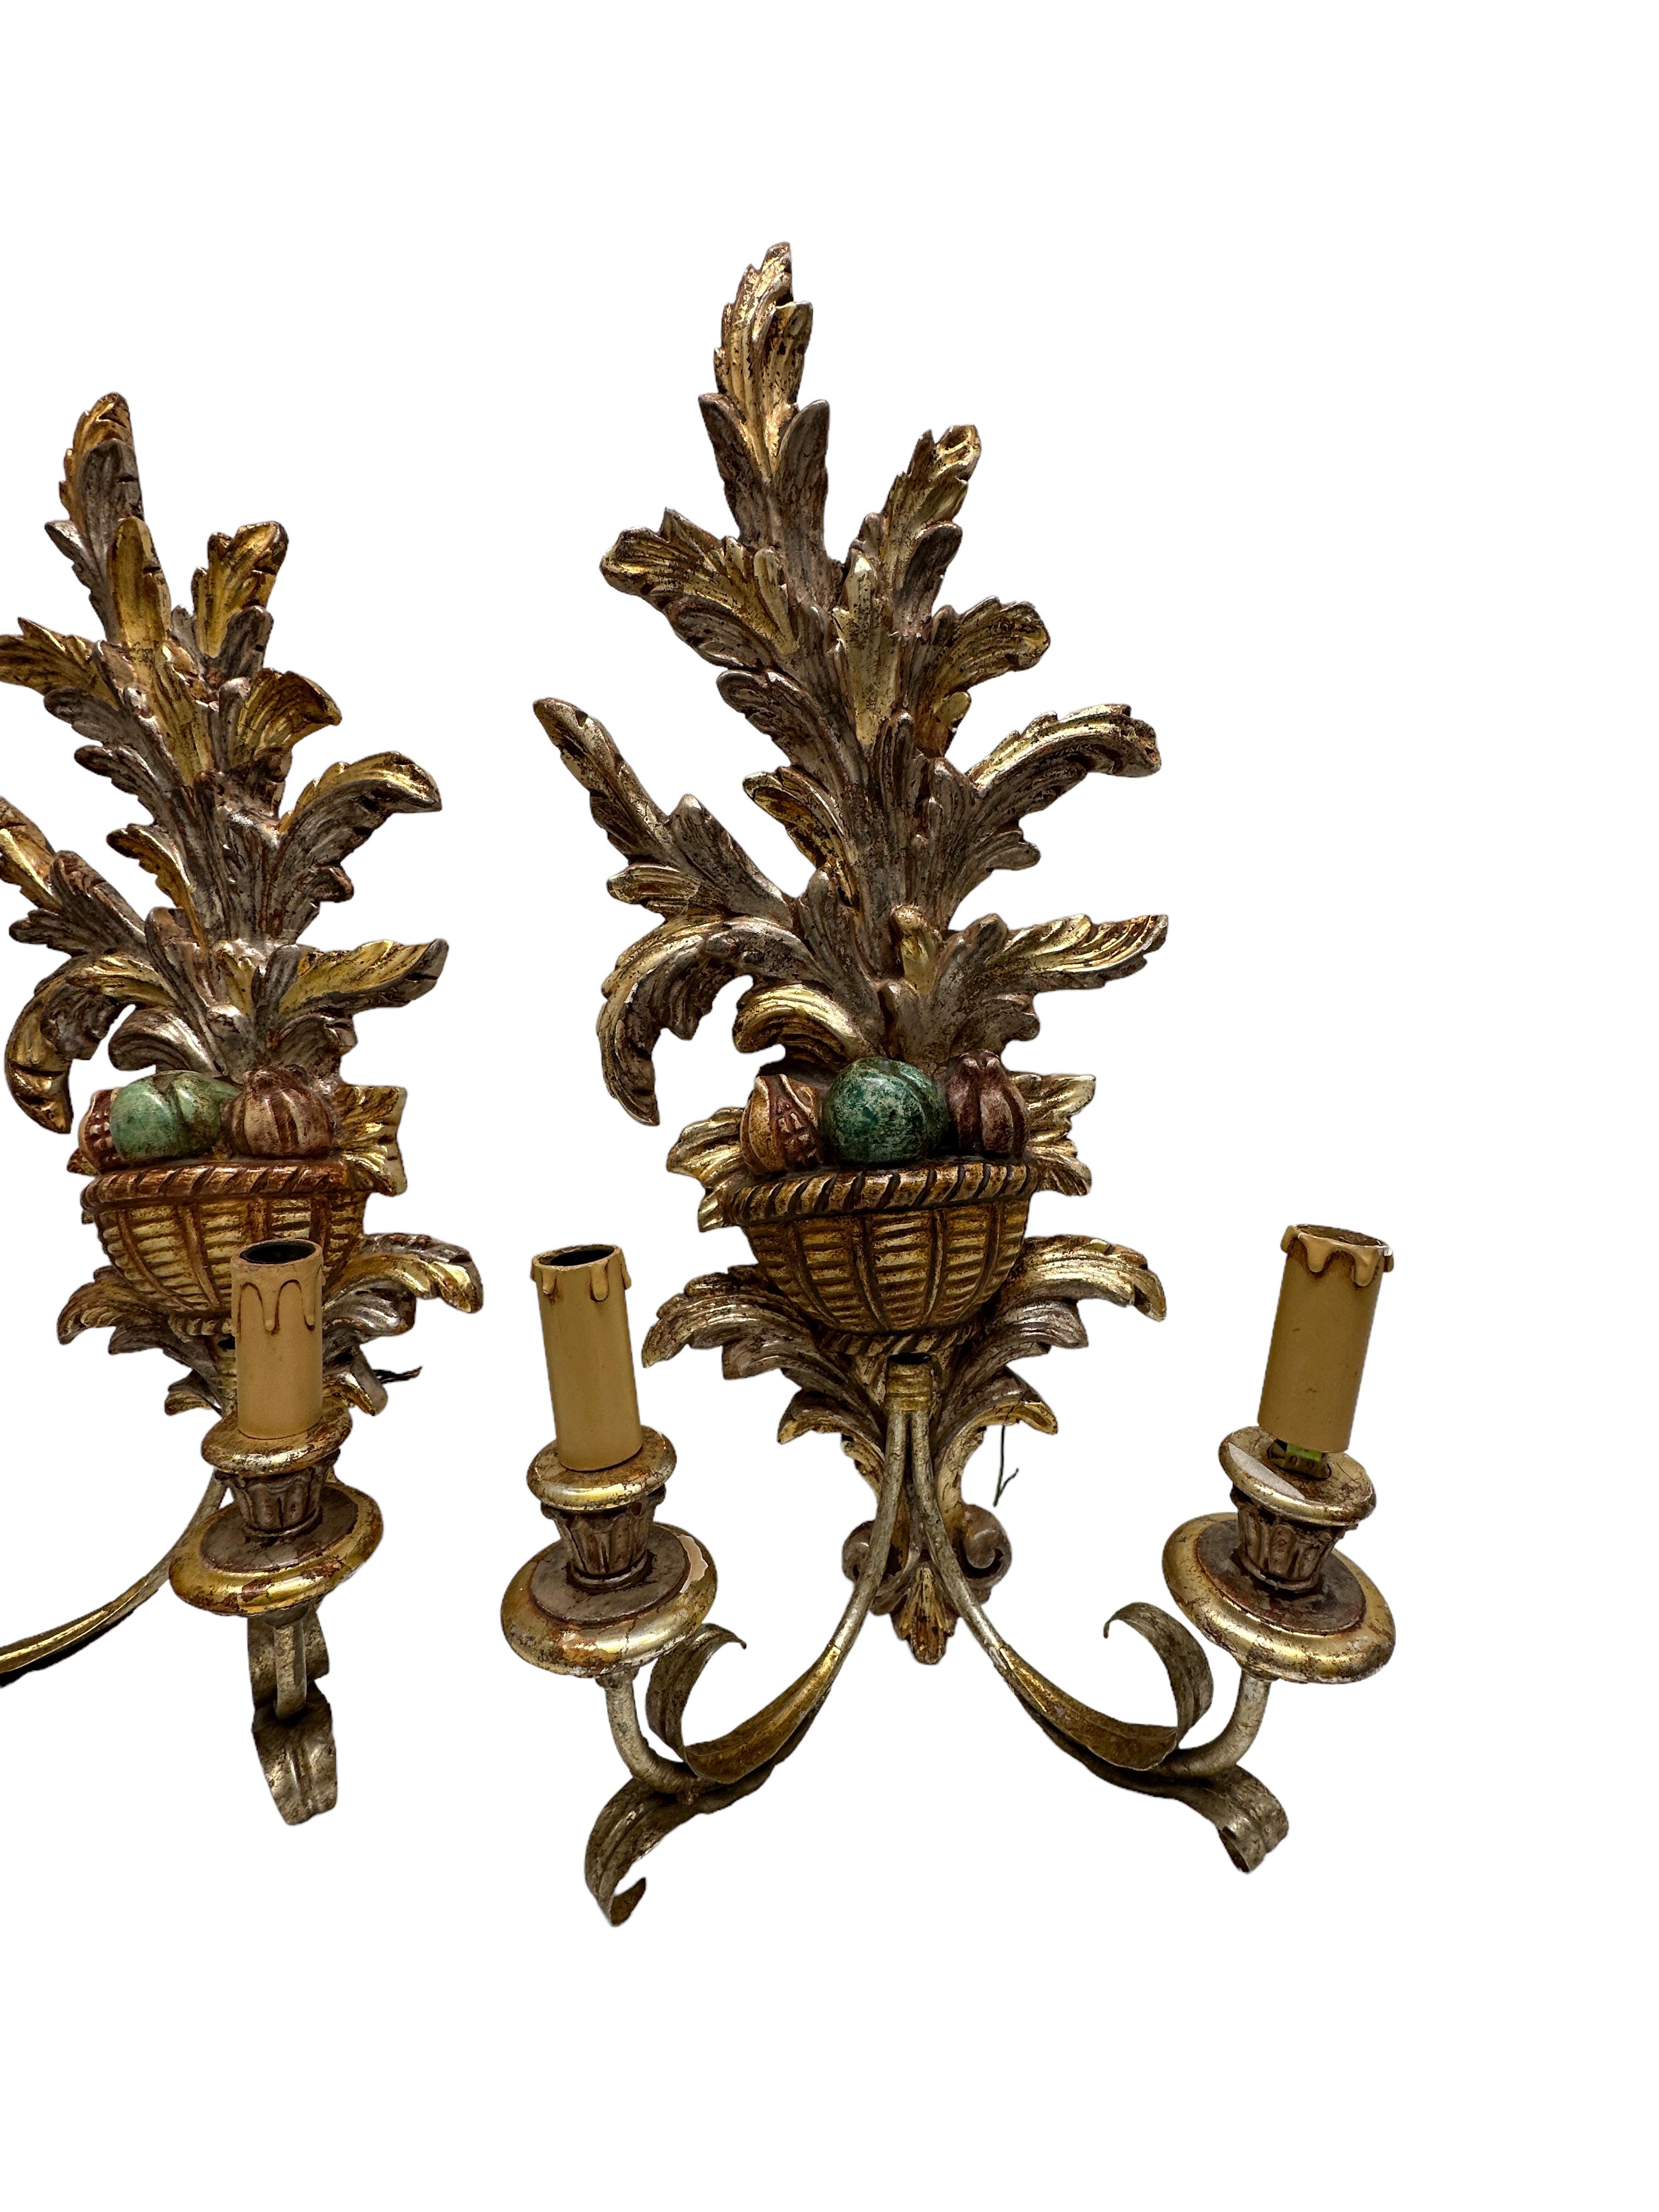 Hand-Carved Monumental Pair of Wooden Carved Tole Toleware Sconces Silver & Gilt For Sale